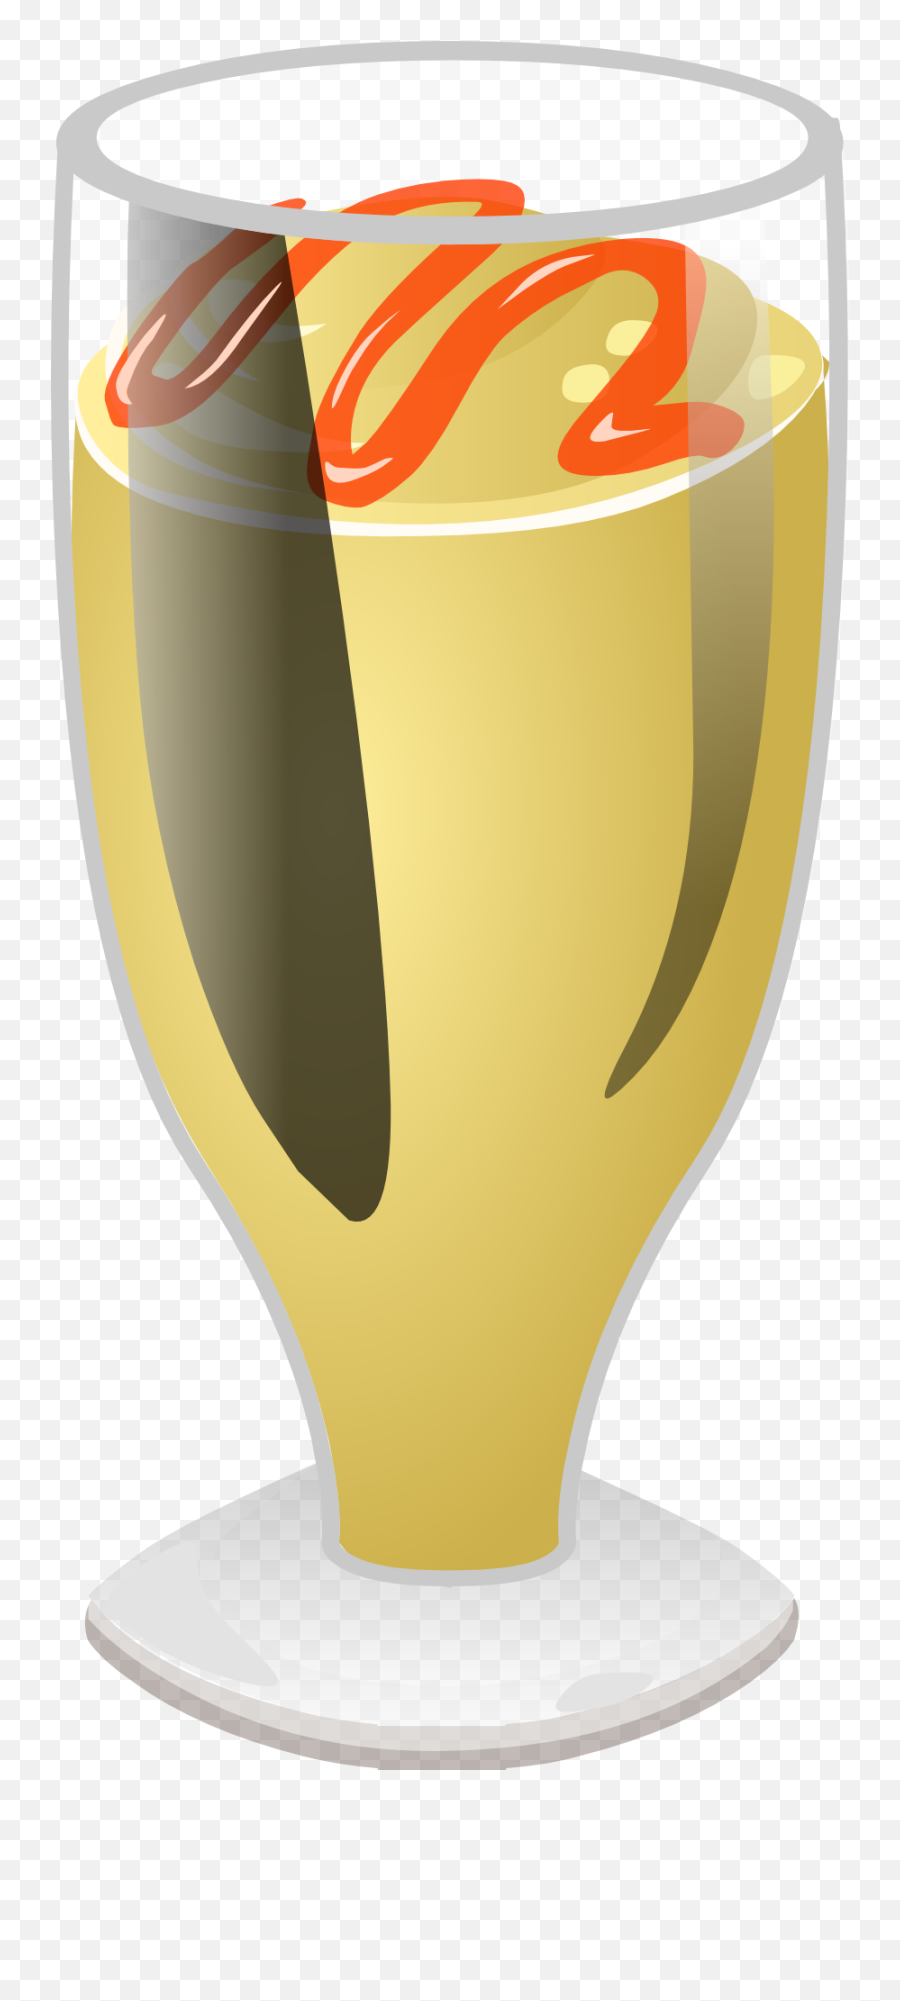 Beer Drink Alcohol - Free Vector Graphic On Pixabay Champagne Glass Emoji,Emojis With Beer